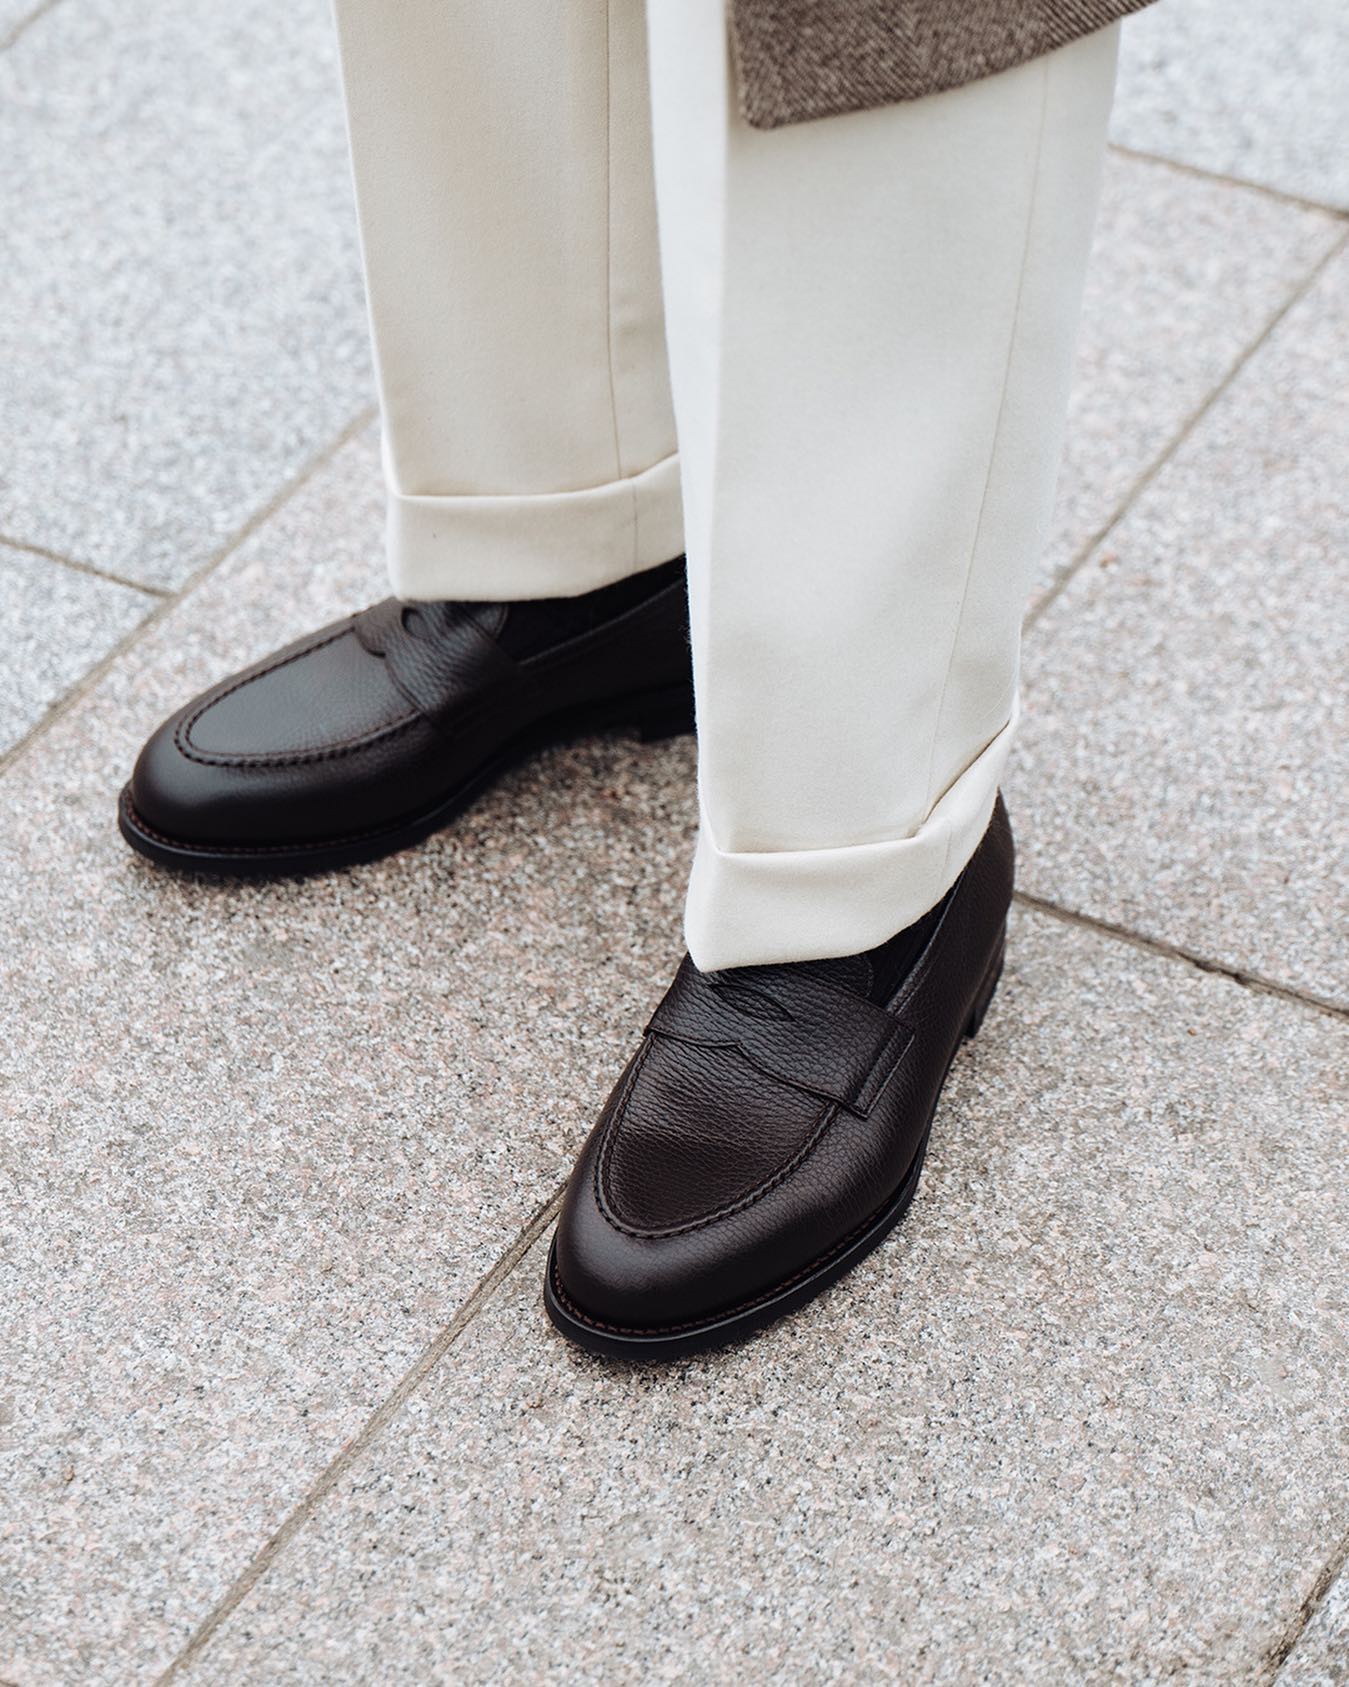 a pair of penny loafer shoes in grain leather